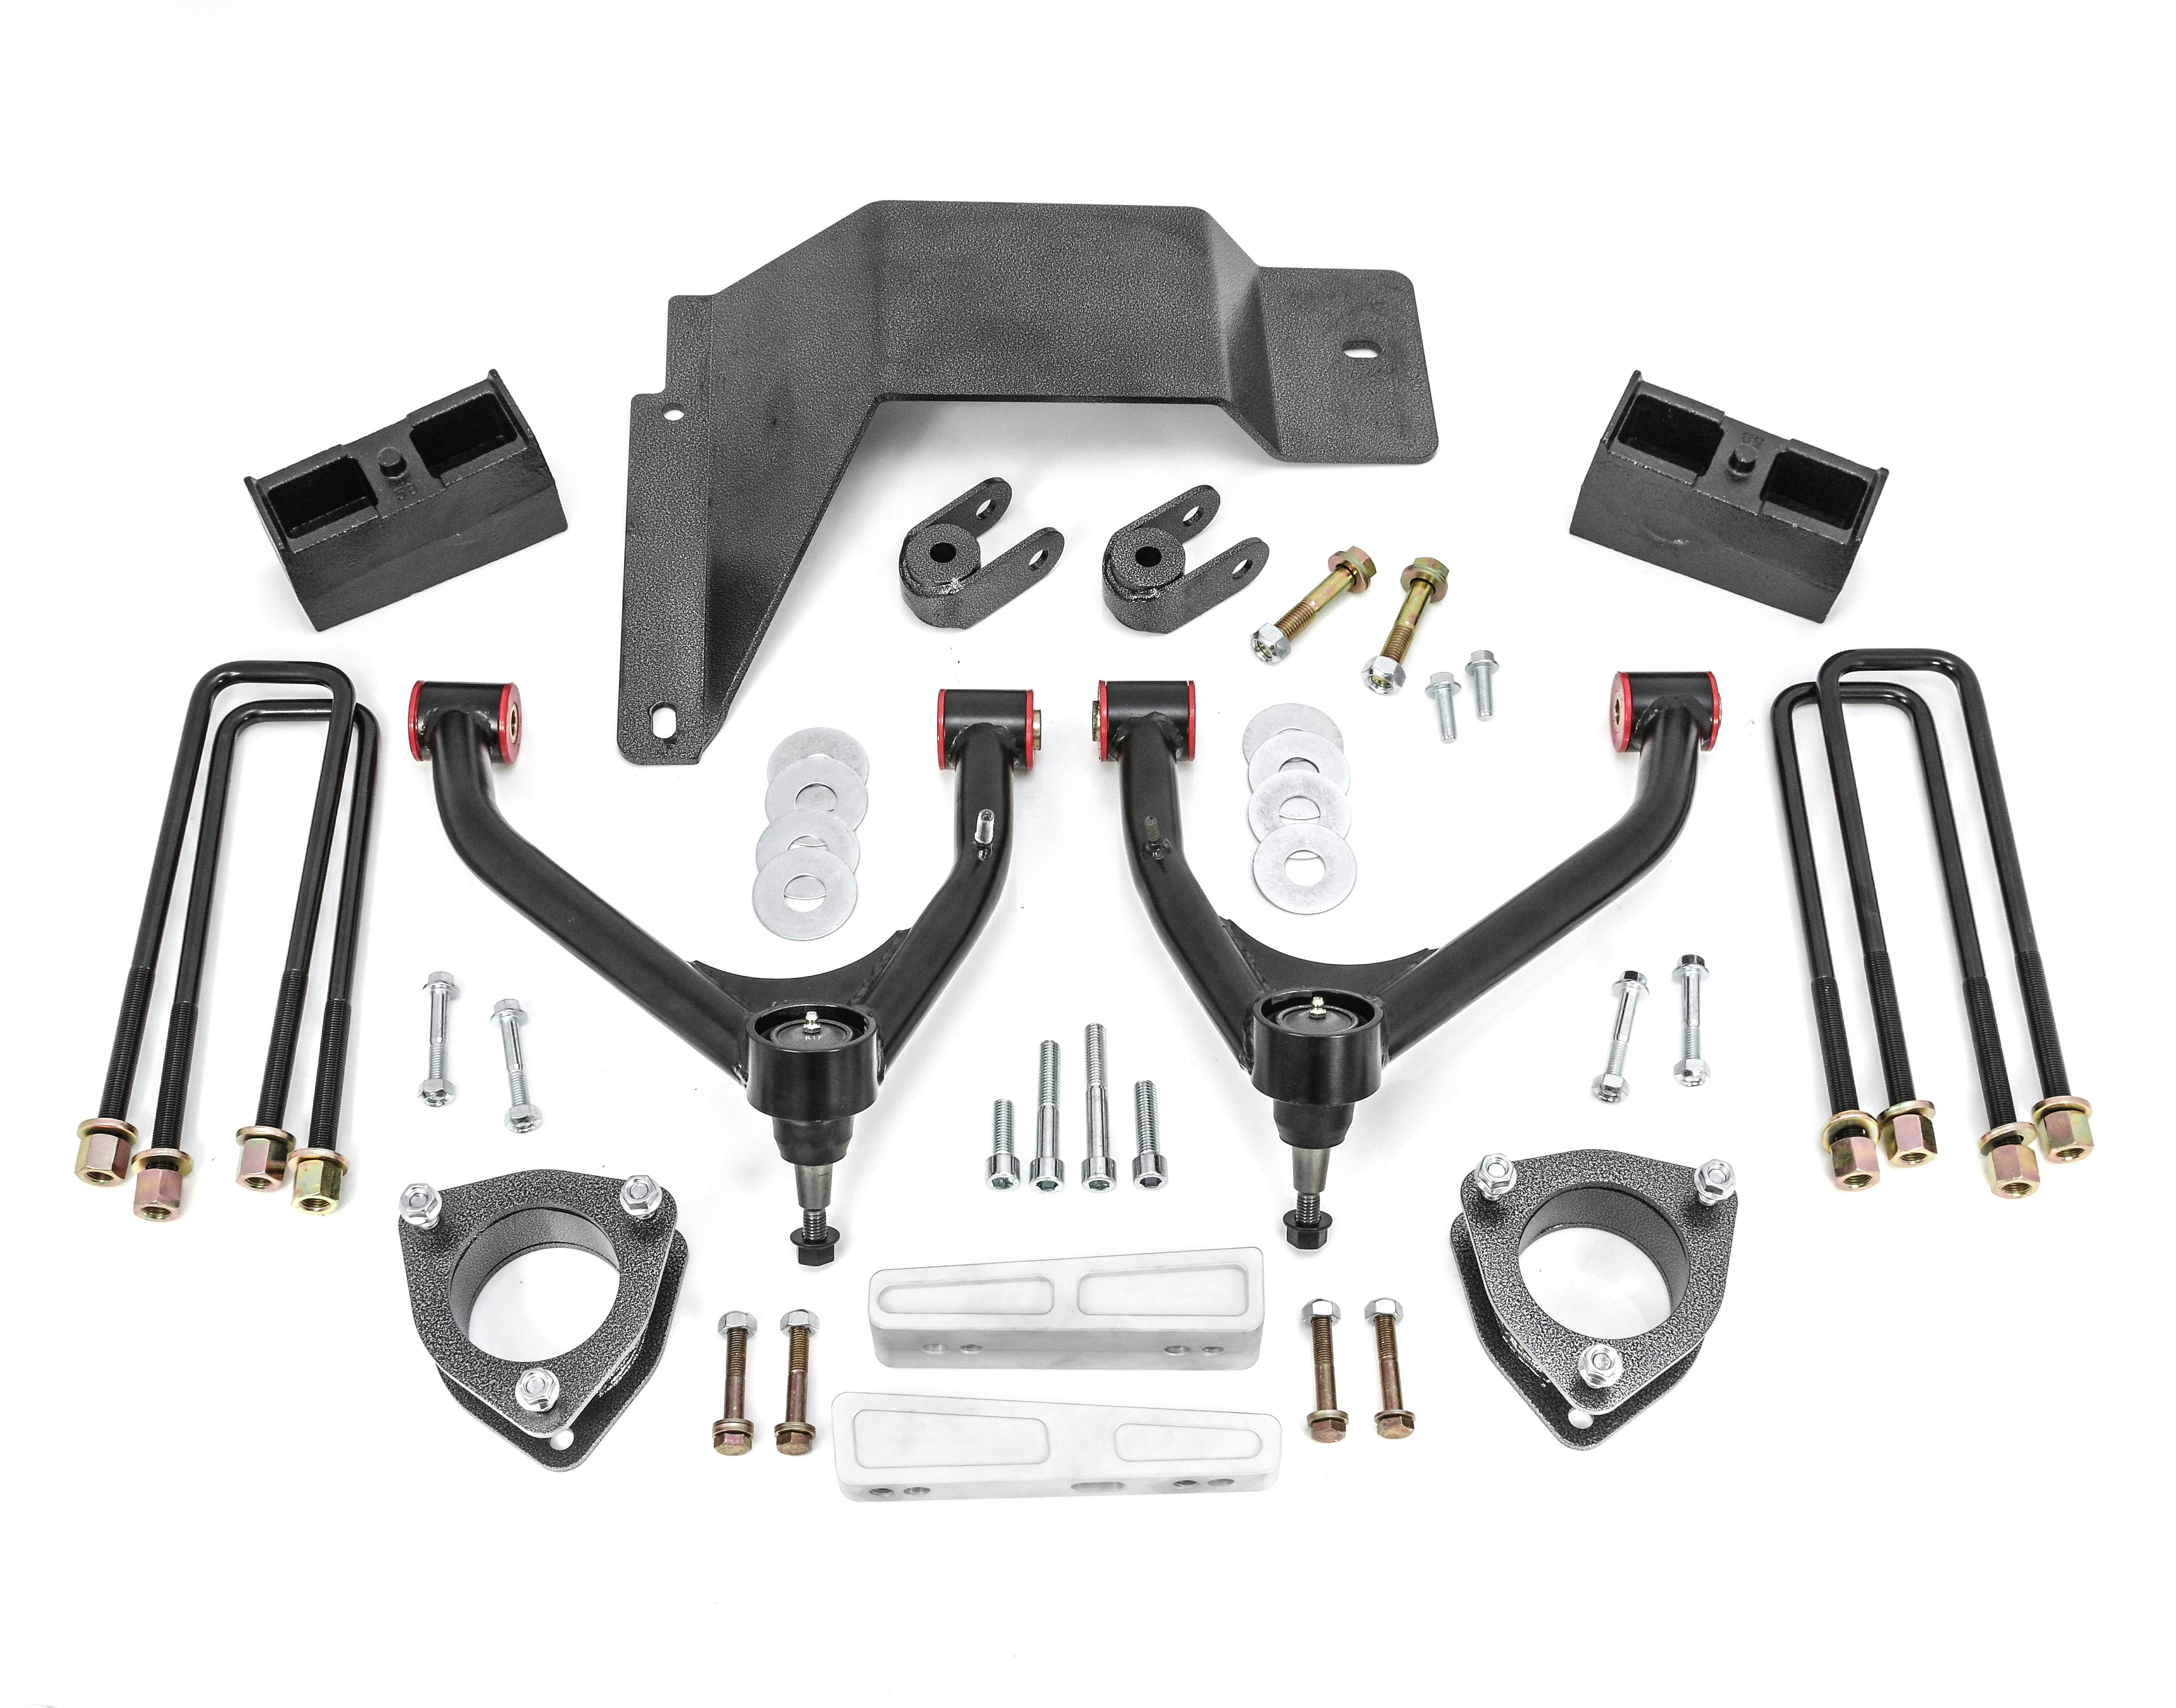 Rugged Off Road 7-104 2.5 Lift for Toyota Tundra 2WD//4WD